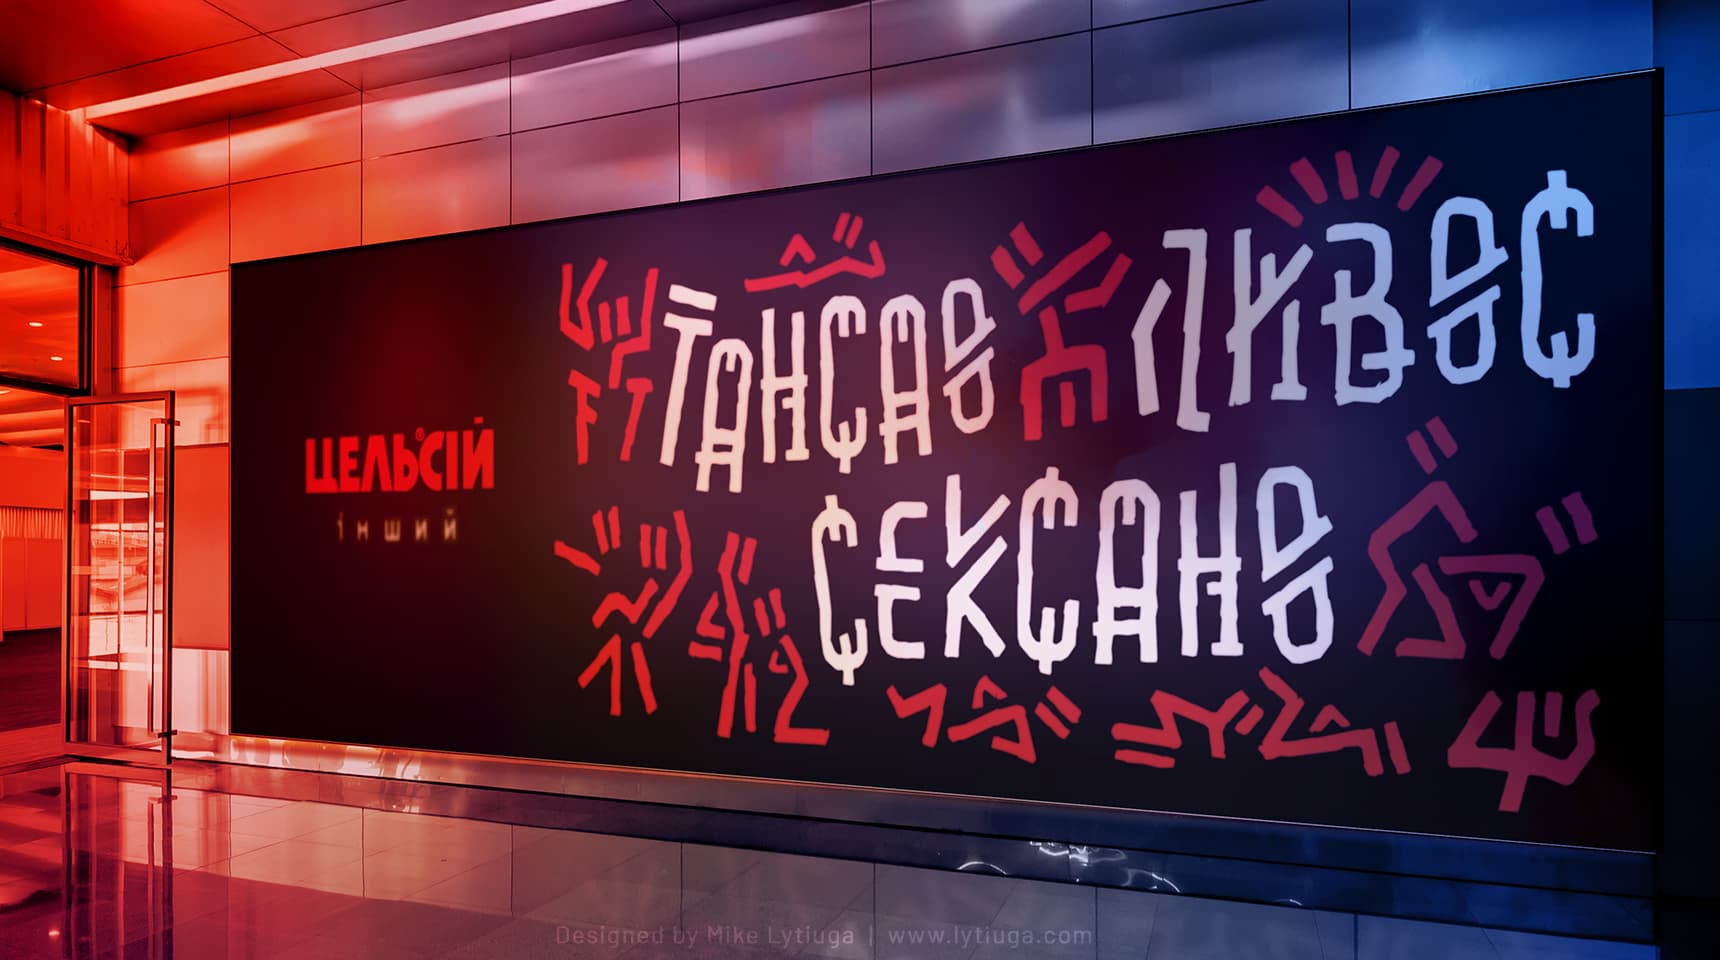 Banners design for vodka celsius promotional campaign in top-10 nightclubs